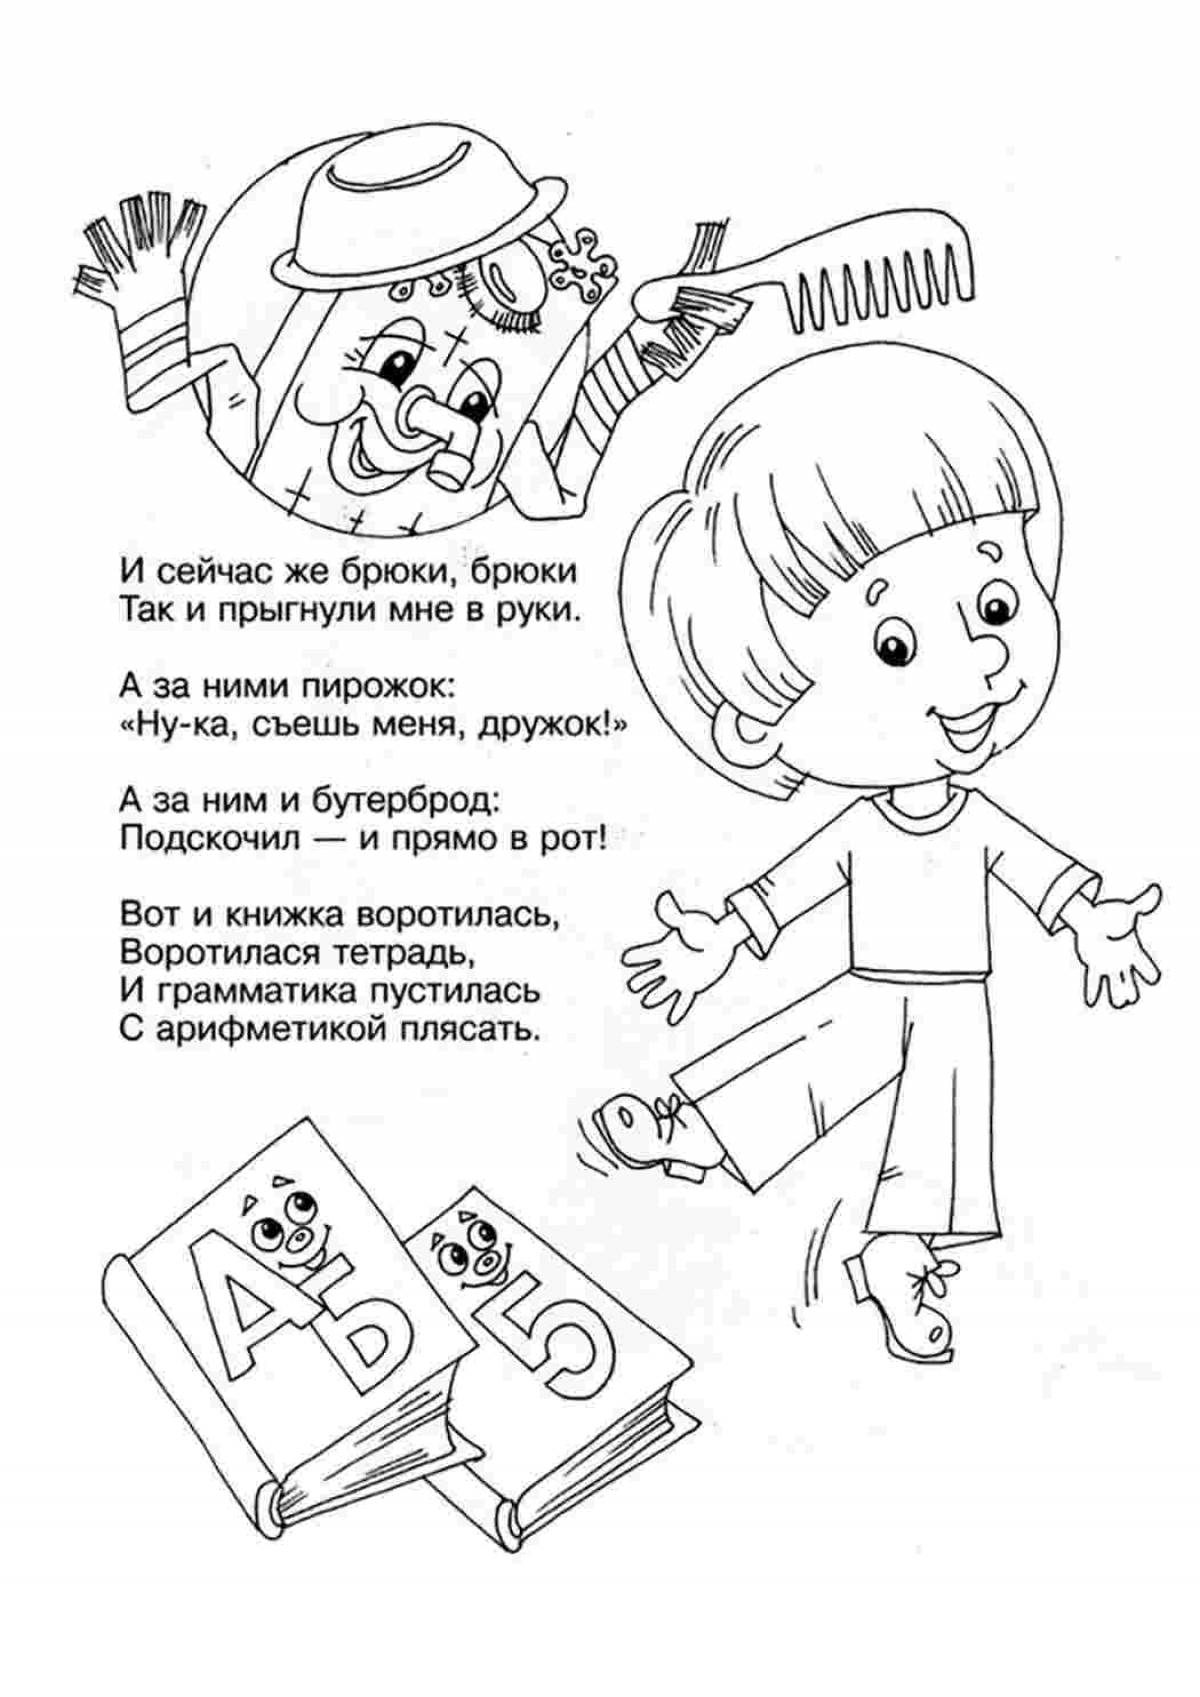 Midodyr coloring book for children 3-4 years old